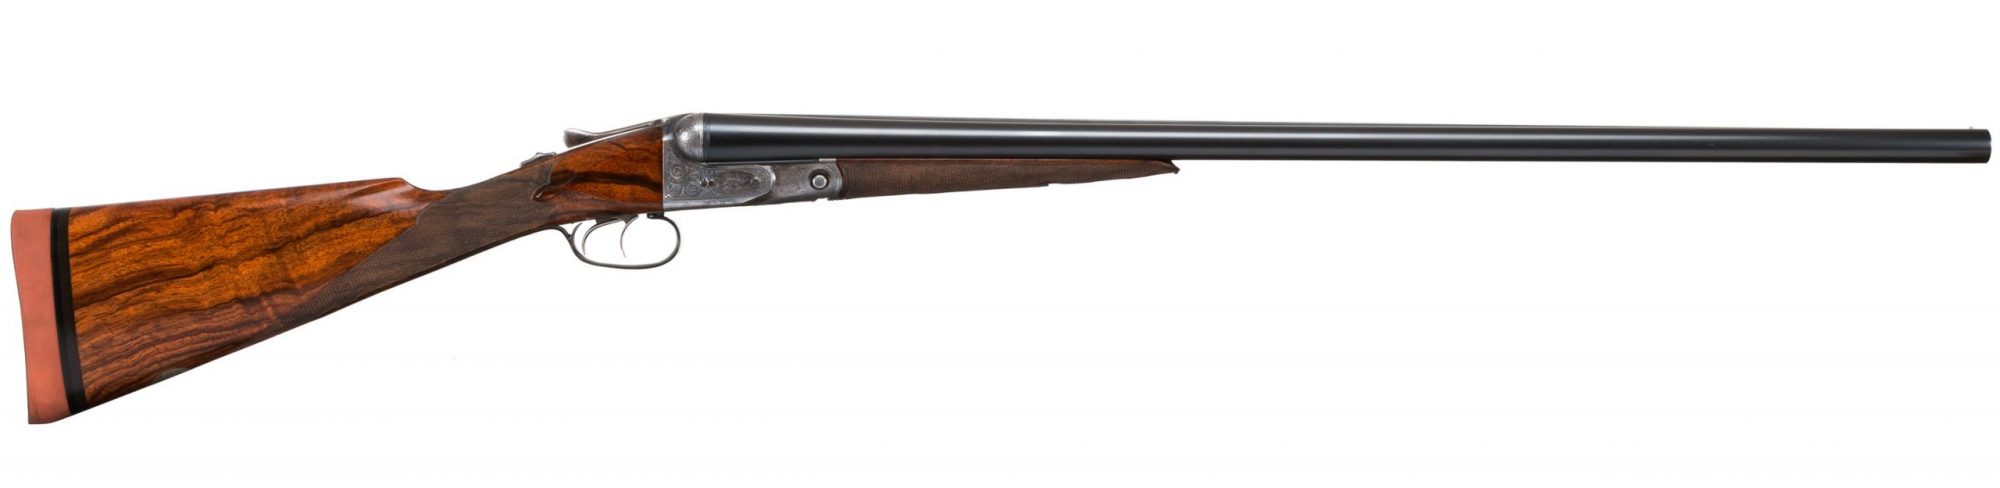 Photo of a pre-owned Parker CHE 12 gauge double, for sale as-is by Turnbull Restoration of Bloomfield, NY